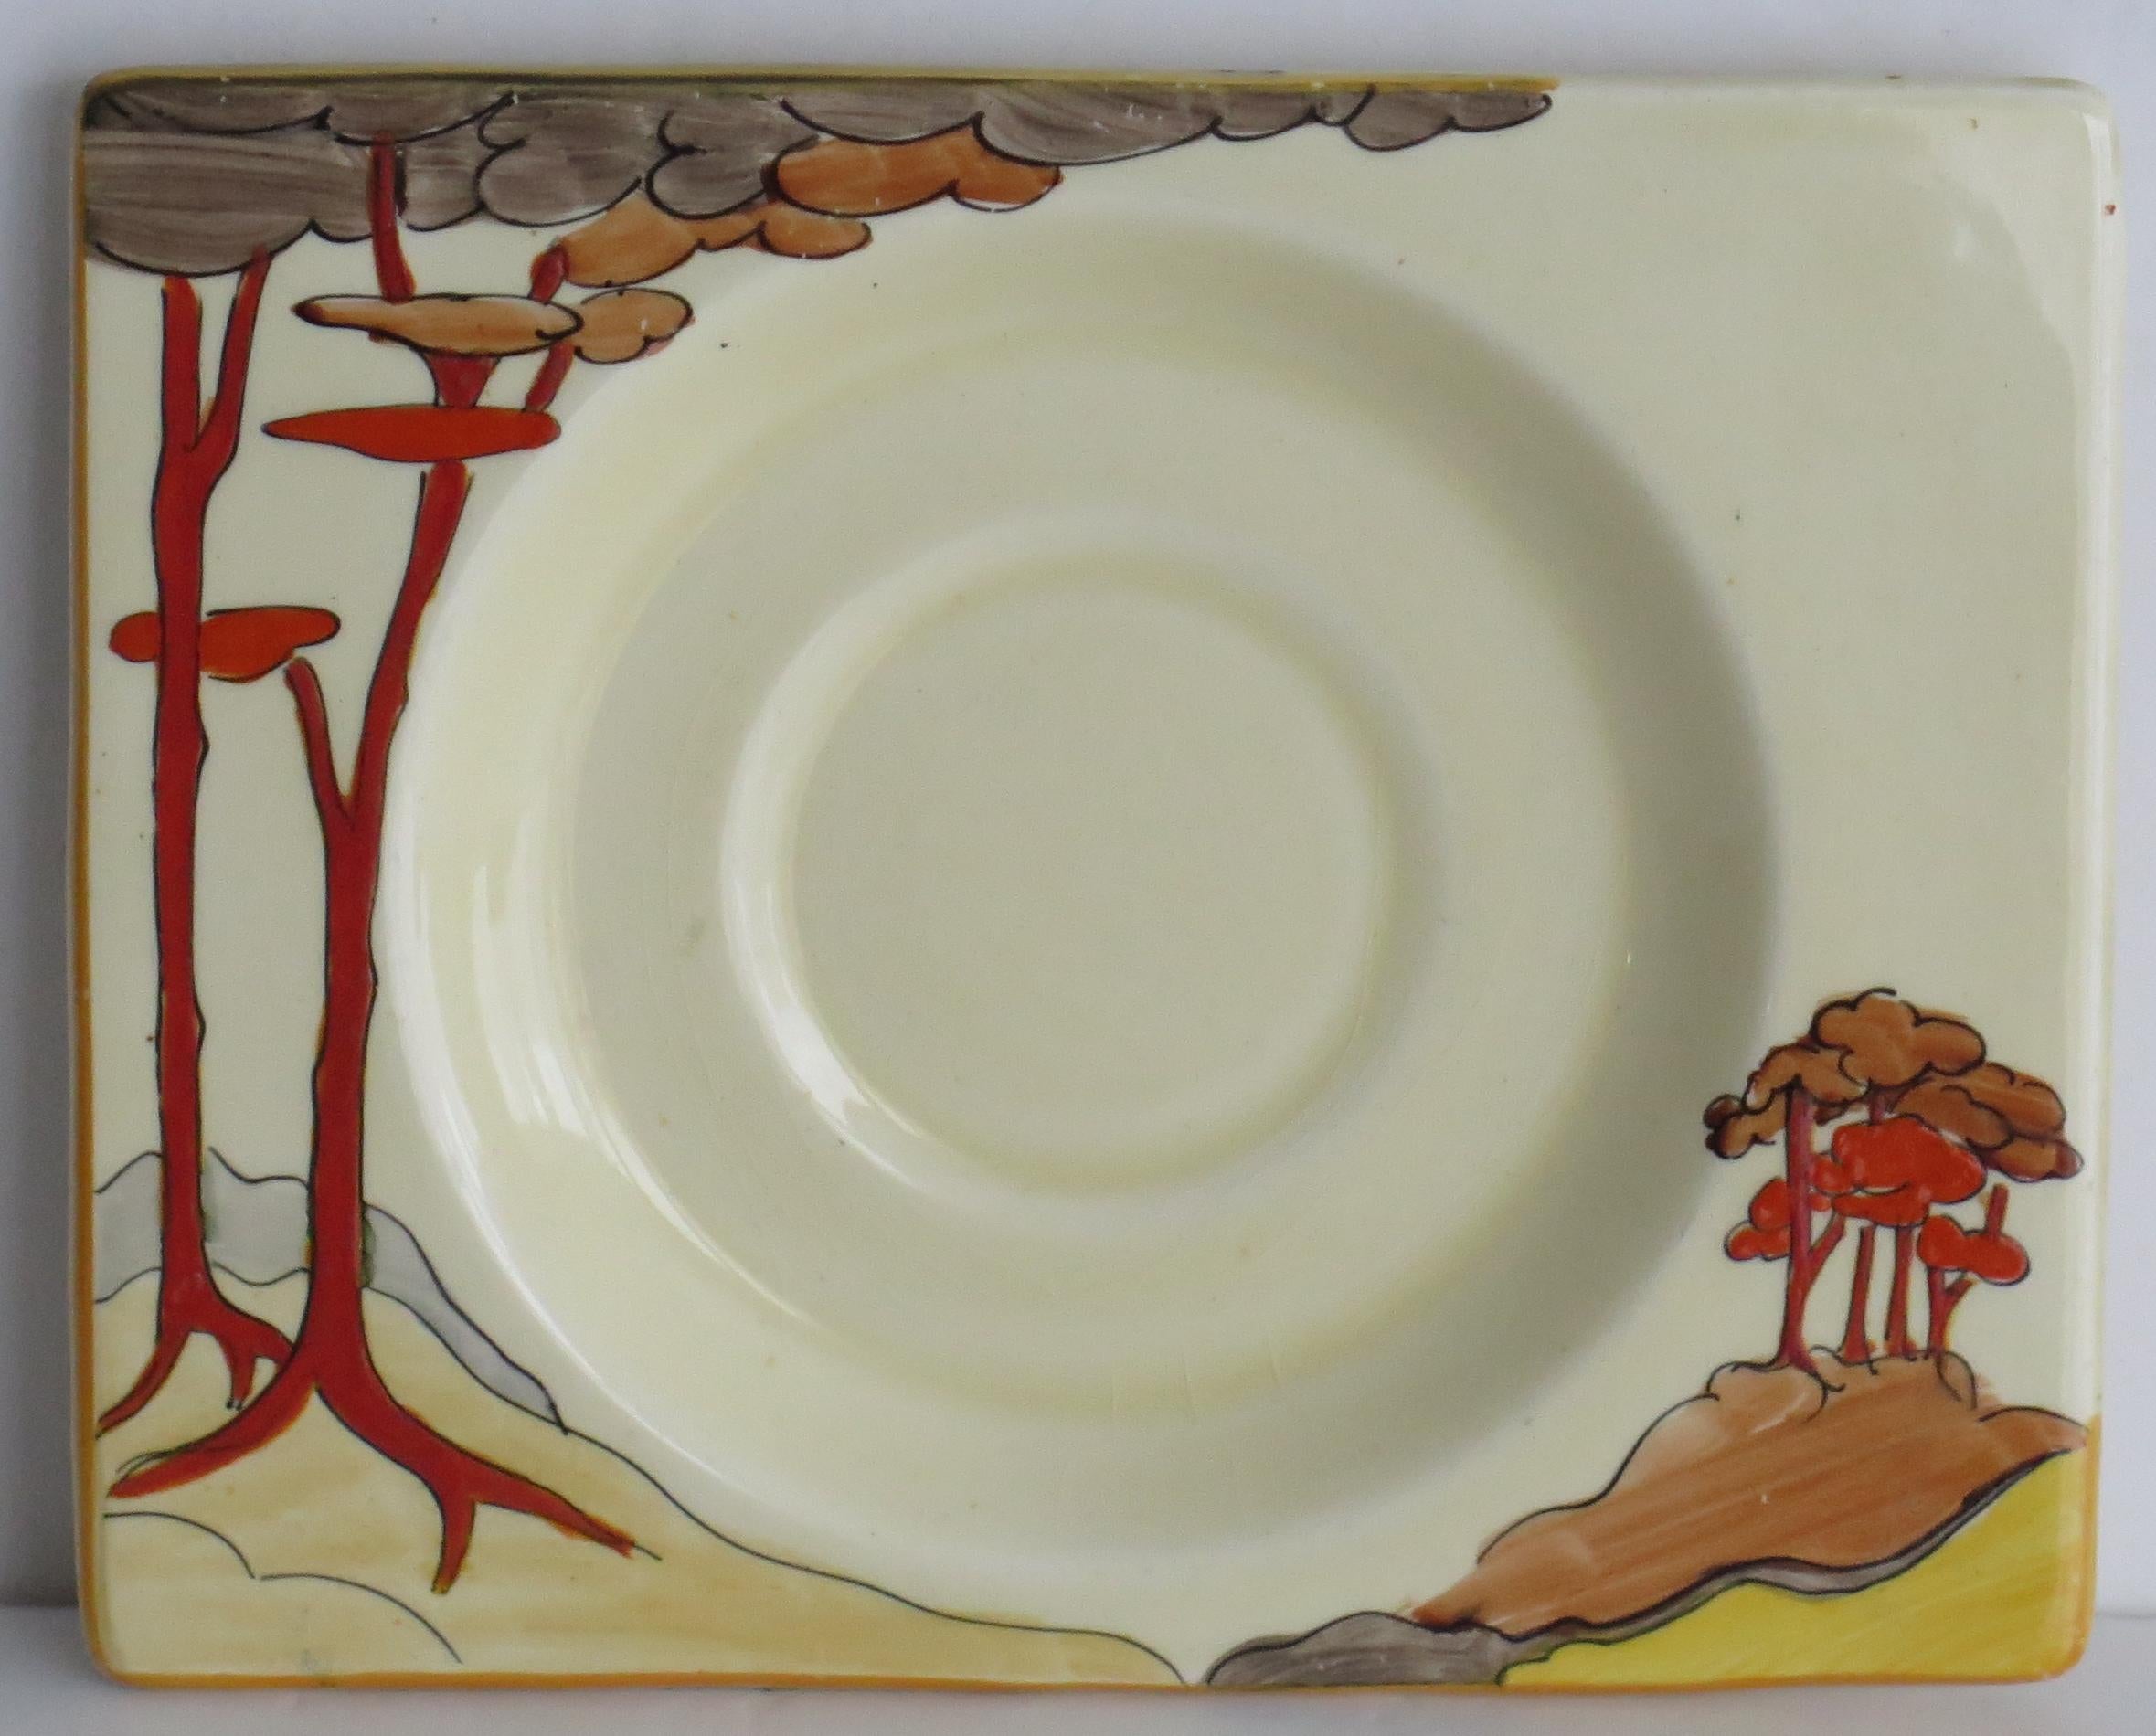 This is a Saucer Dish in the Biarritz shape, hand painted in the 